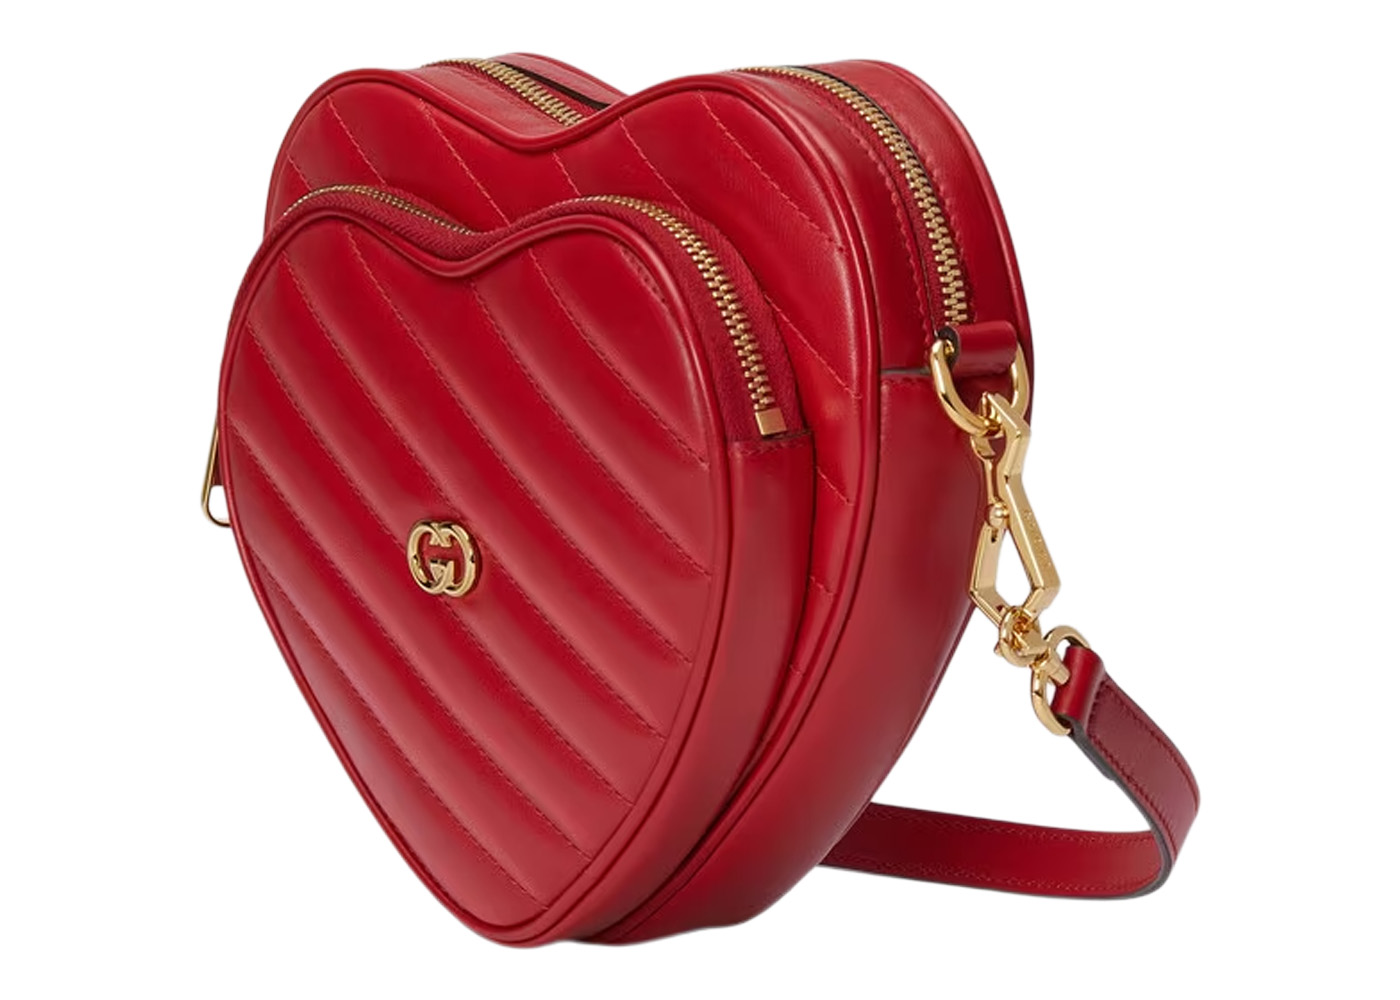 Gucci Interlocking G Mini Heart Shoulder Bag Red in Leather with ...